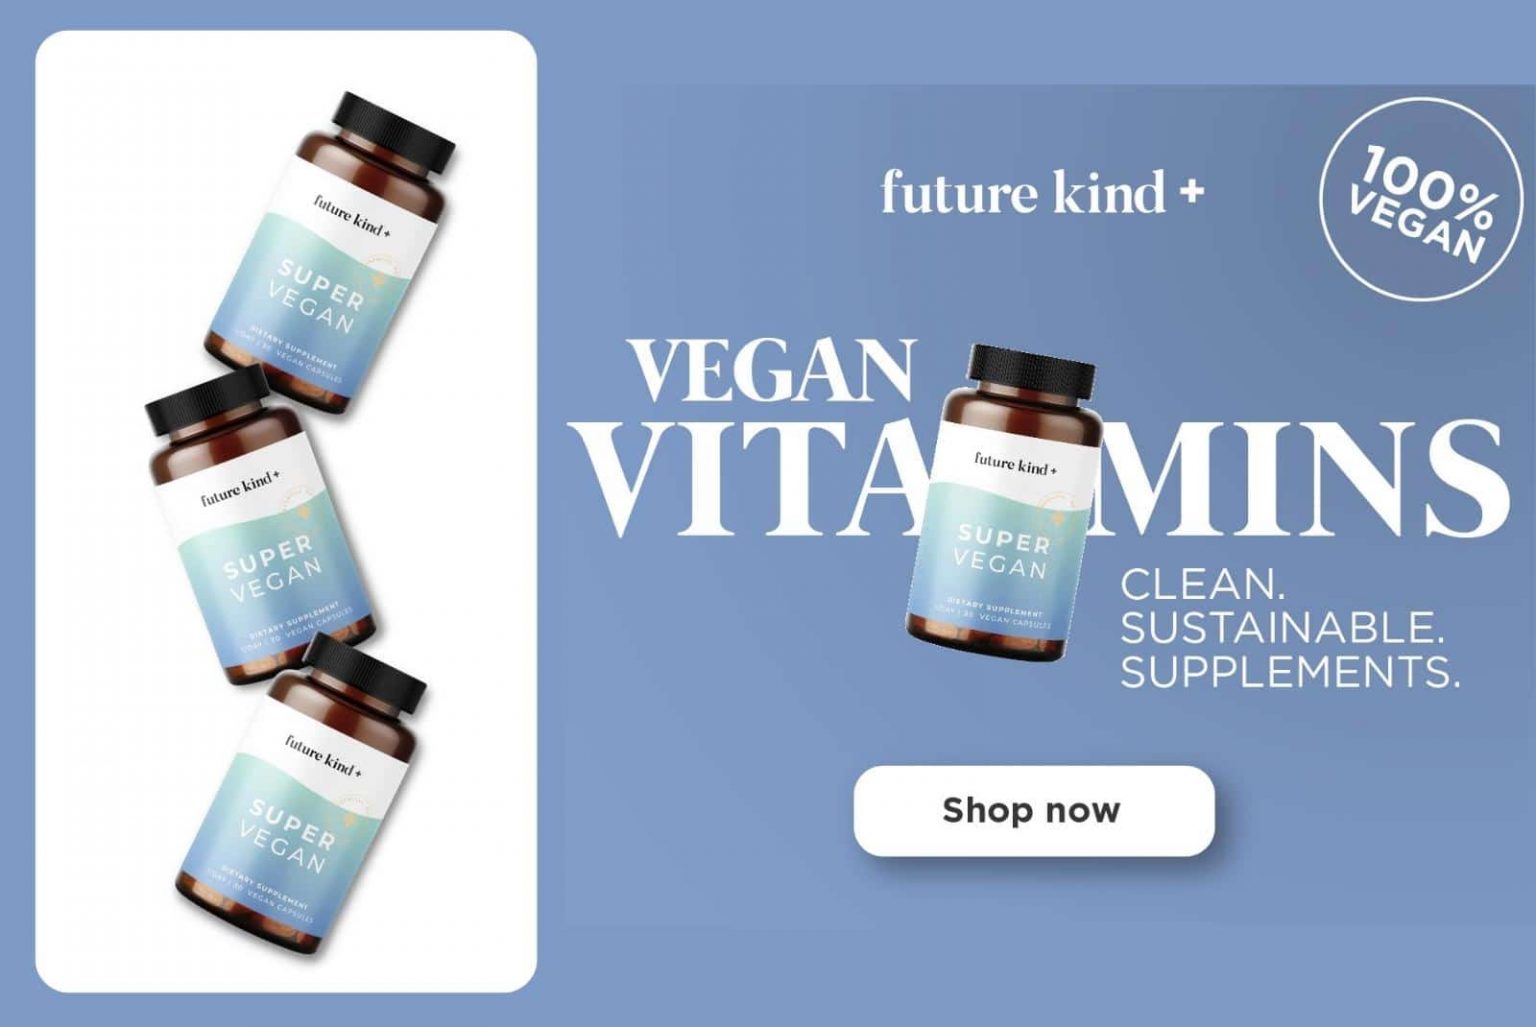 Future kind+ Super Vegan is a blend of three evidence-based herbs to help support stress, helping you to be your best, most superest self.